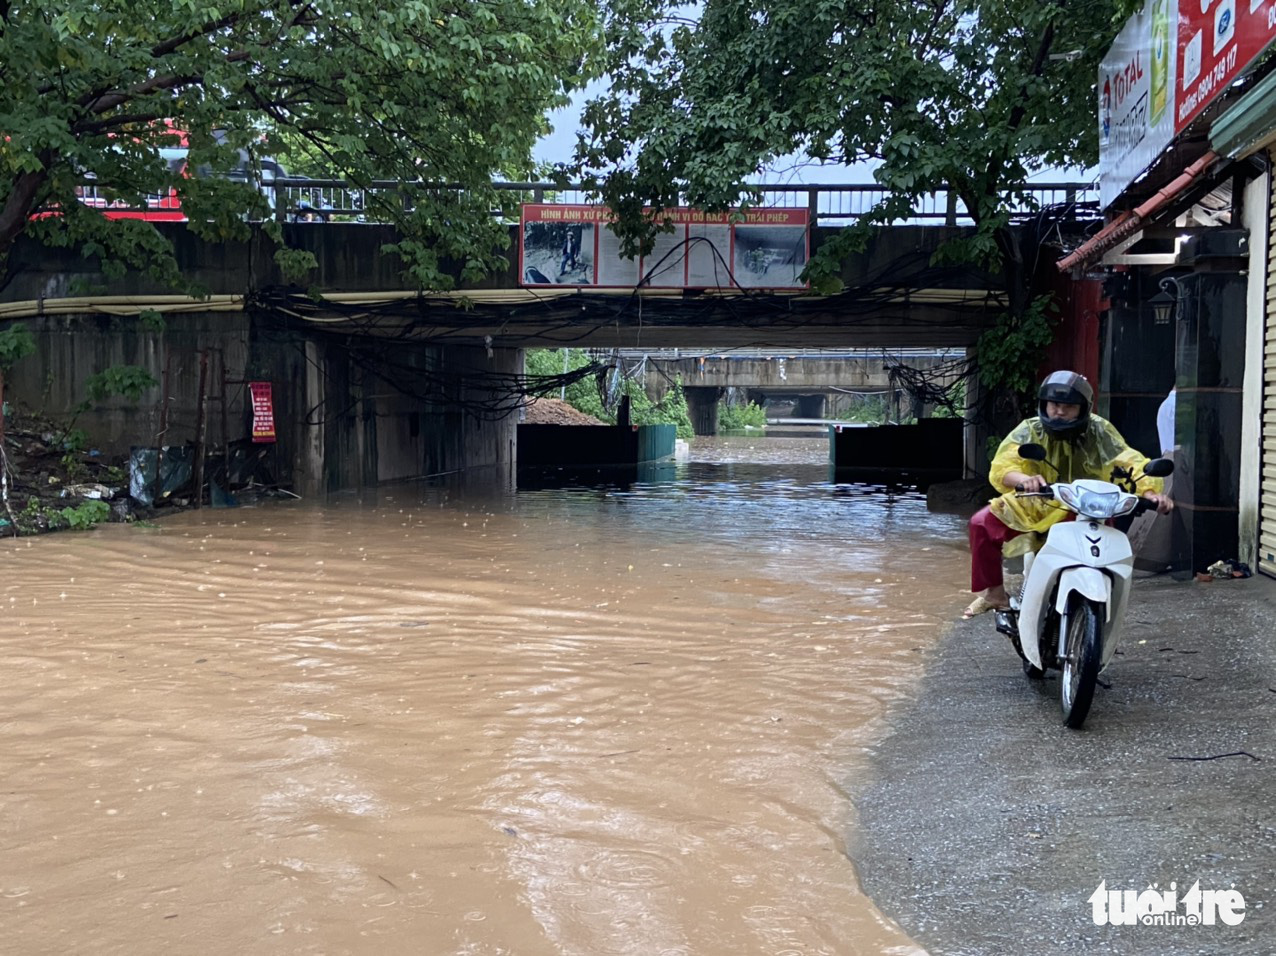 A person rides their motorbike through a flooded area in Nam Tu Liem District, Hanoi, May 29, 2022. Photo: Quang The / Tuoi Tre